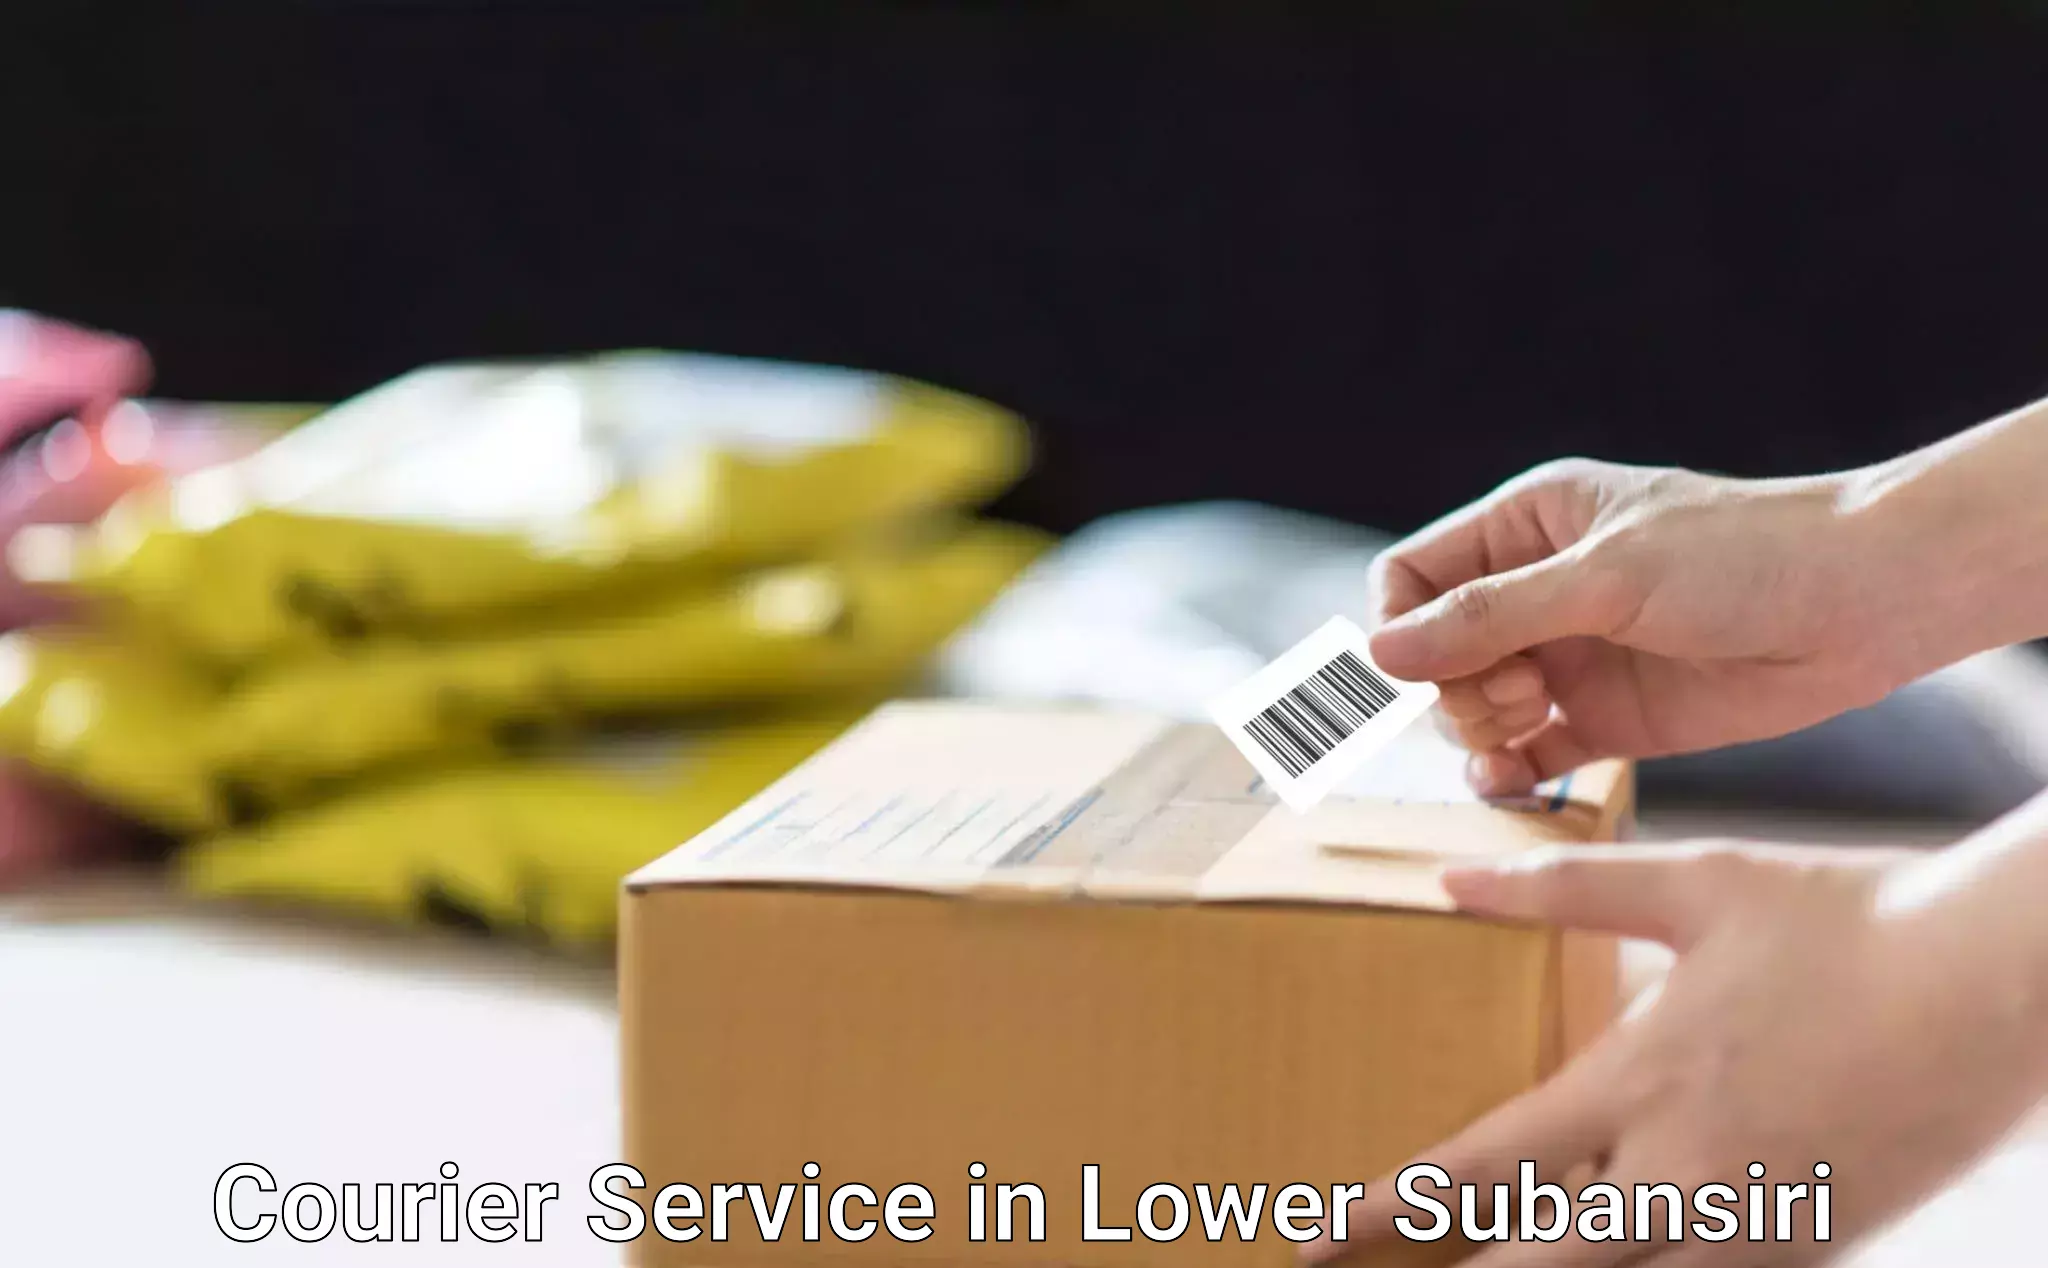 Short distance delivery in Lower Subansiri